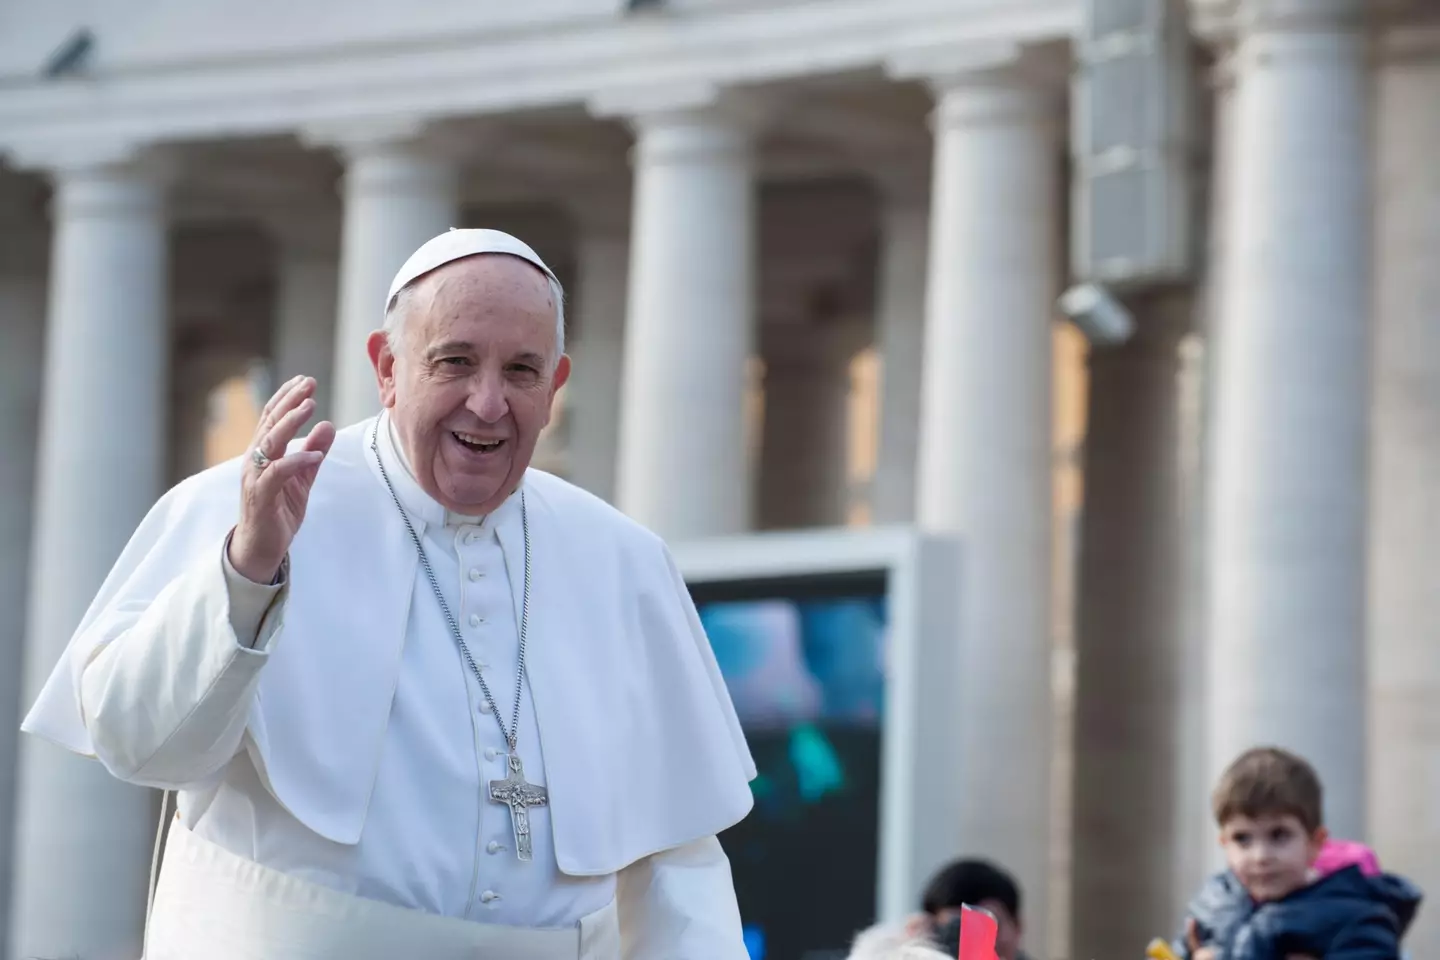 Pope Francis has compared getting an abortion to 'hiring a hitman'.